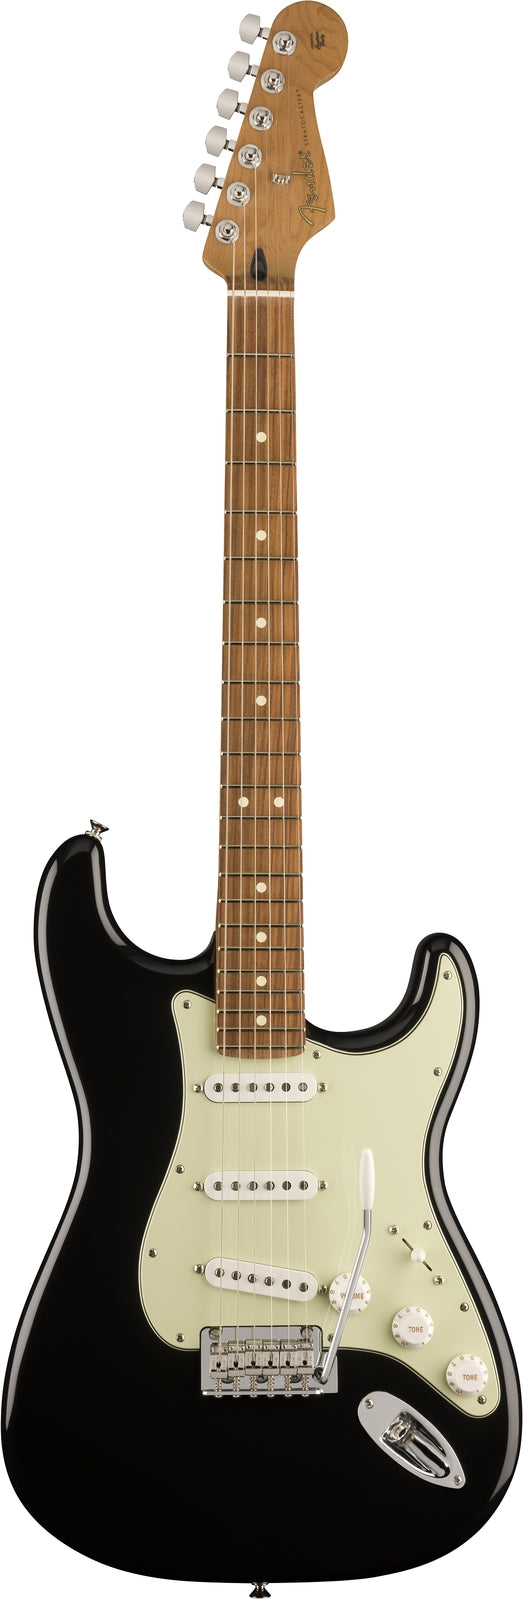 Limited Edition Player Stratocaster Roasted Maple Neck Black